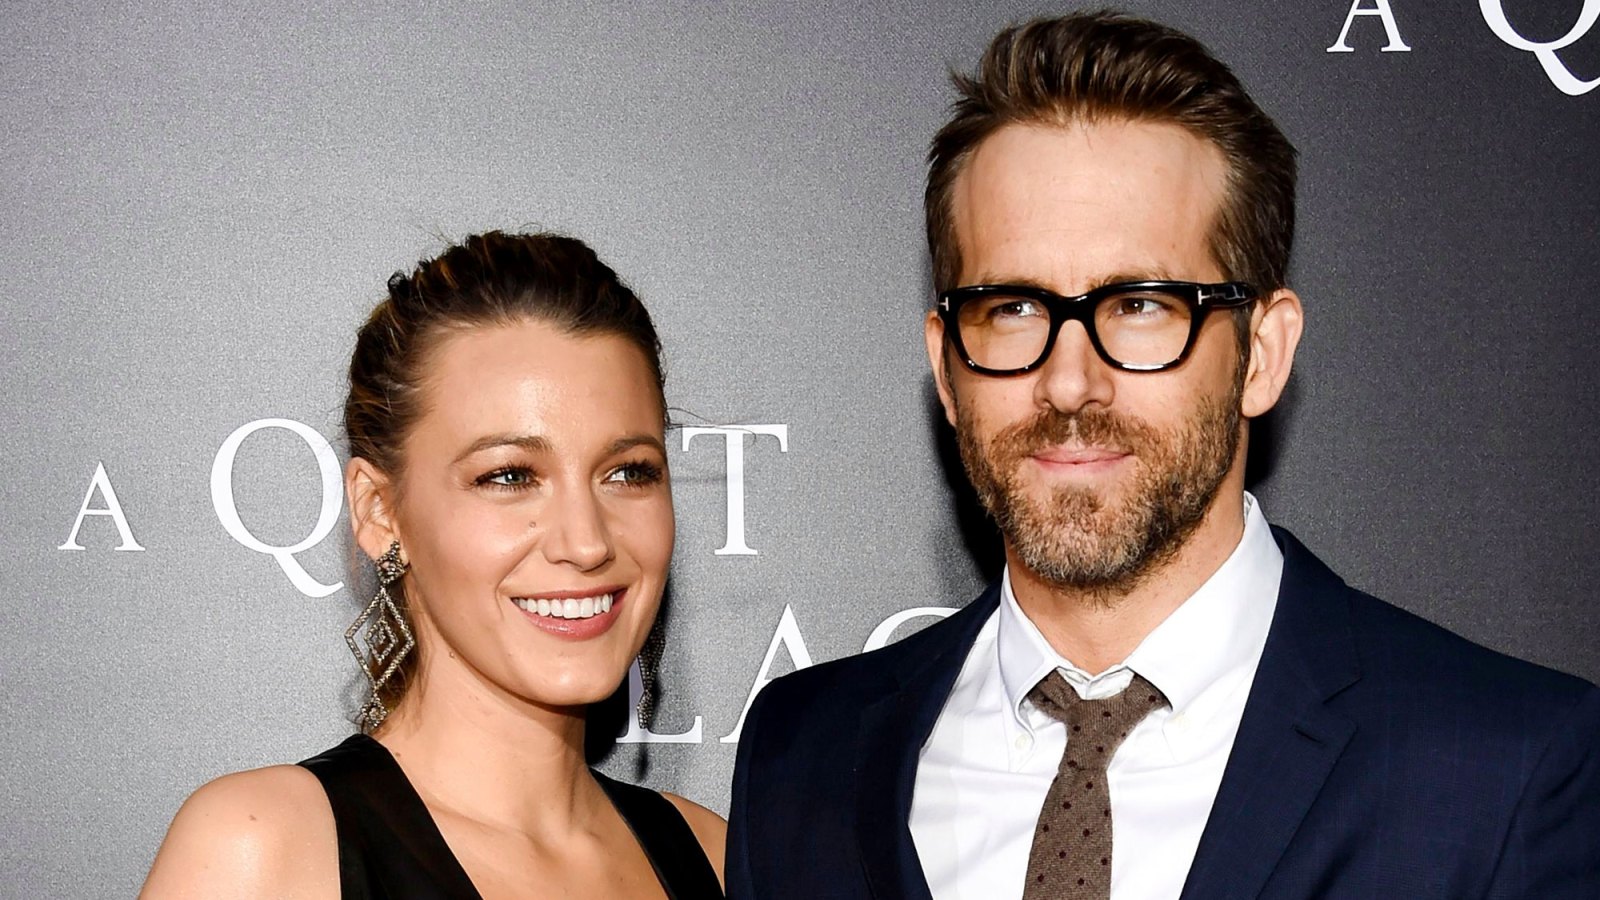 Blake Lively Was ‘Relieved’ to Reveal 4th Pregnancy With Ryan Reynolds